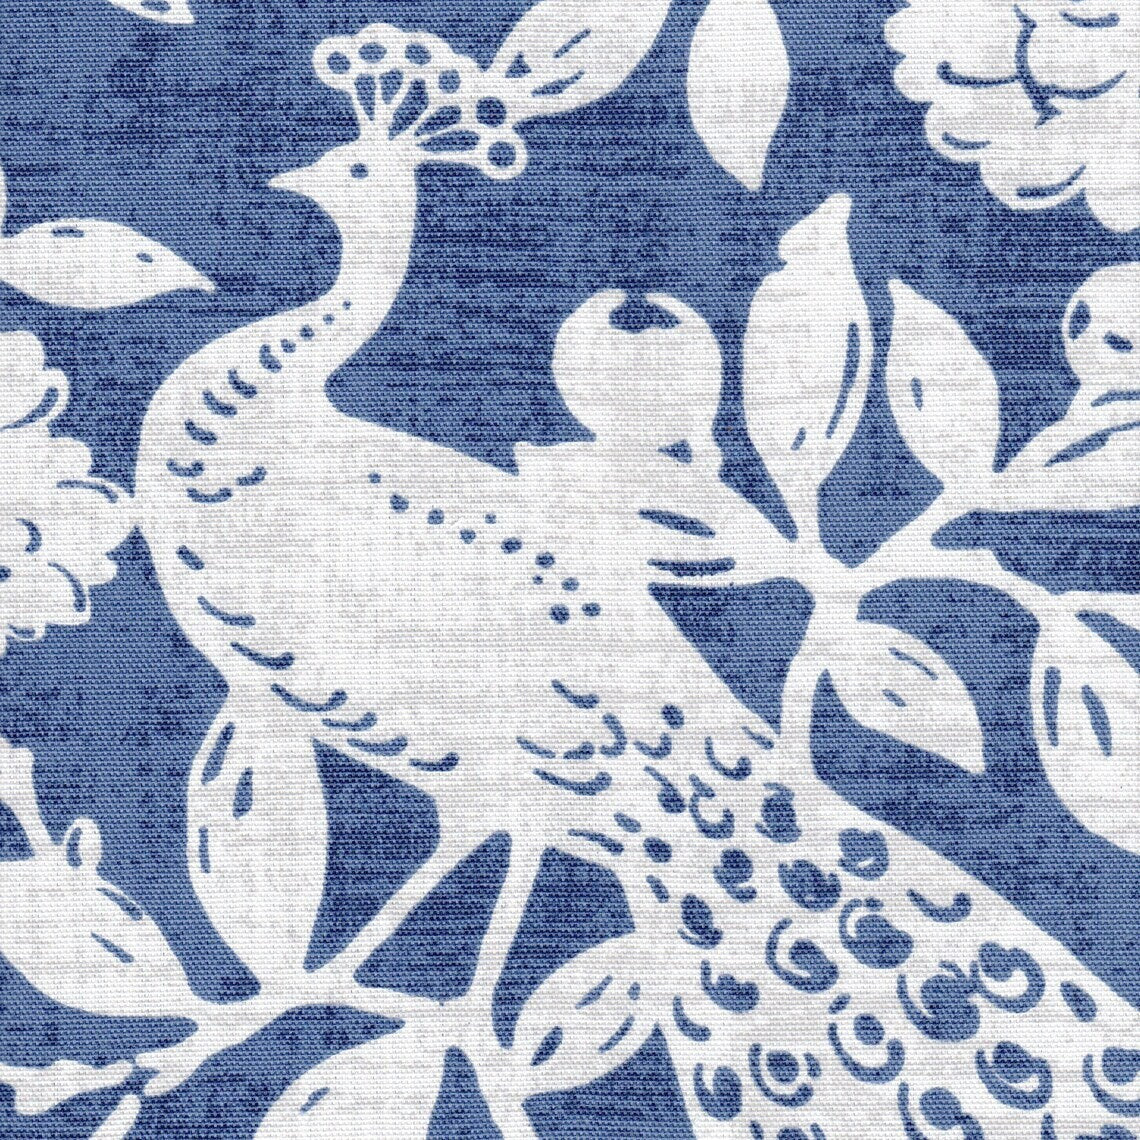 tailored crib skirt in birdsong navy blue bird toile, large scale